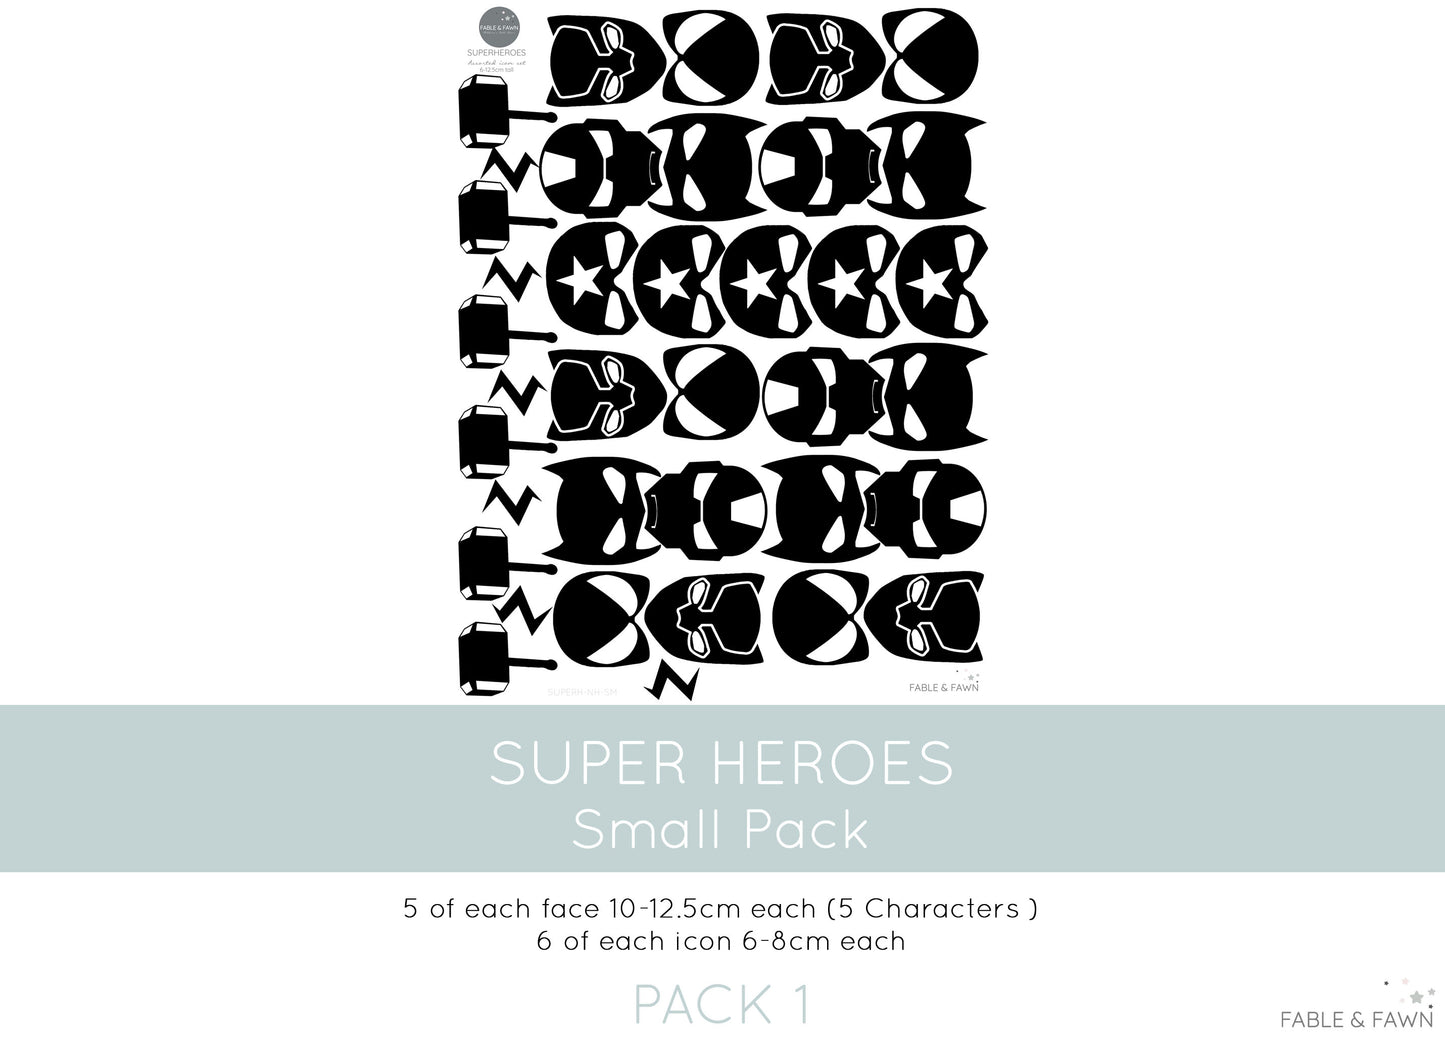 Superhero Wall Decals - Wall Decals - Fable and Fawn 